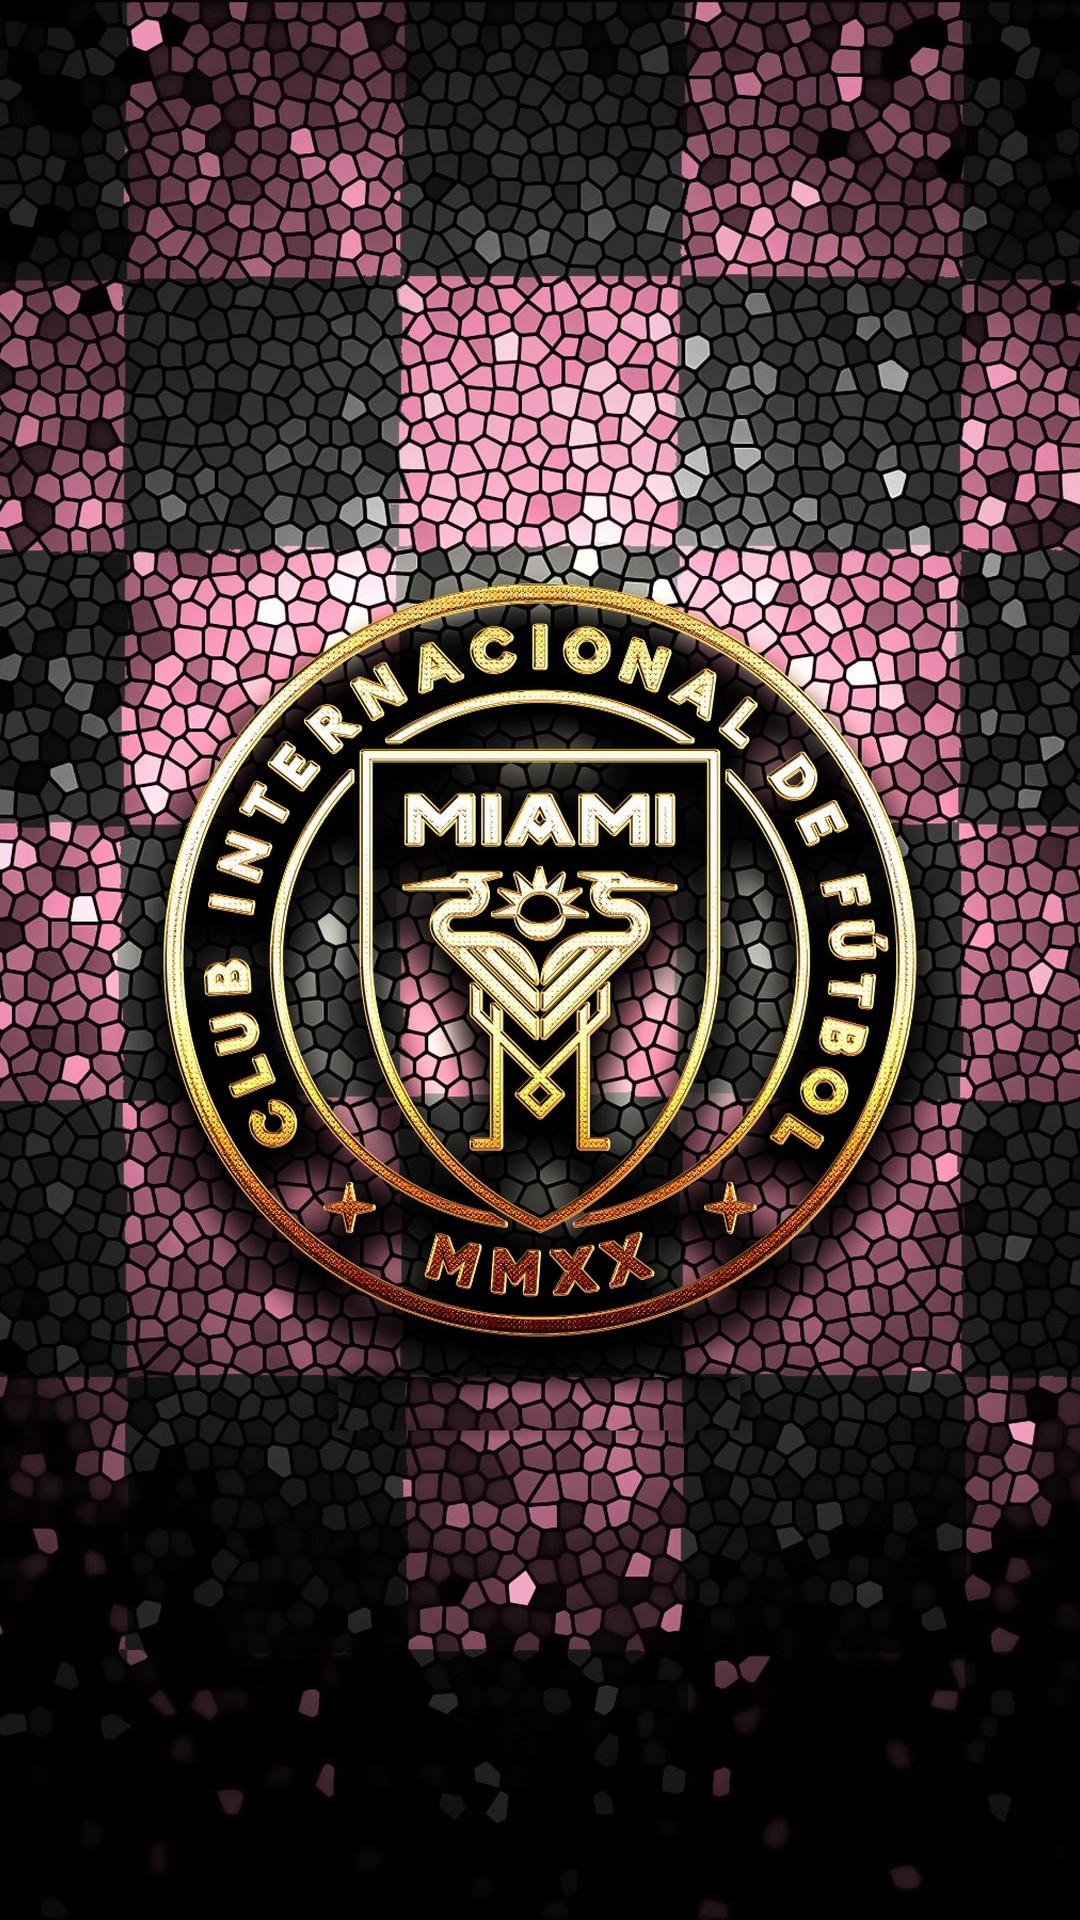 iPhone Wallpaper HD Inter Miami With high-resolution 1080X1920 pixel. You can use this wallpaper for your Desktop Computers, Mac Screensavers, Windows Backgrounds, iPhone Wallpapers, Tablet or Android Lock screen and another Mobile device